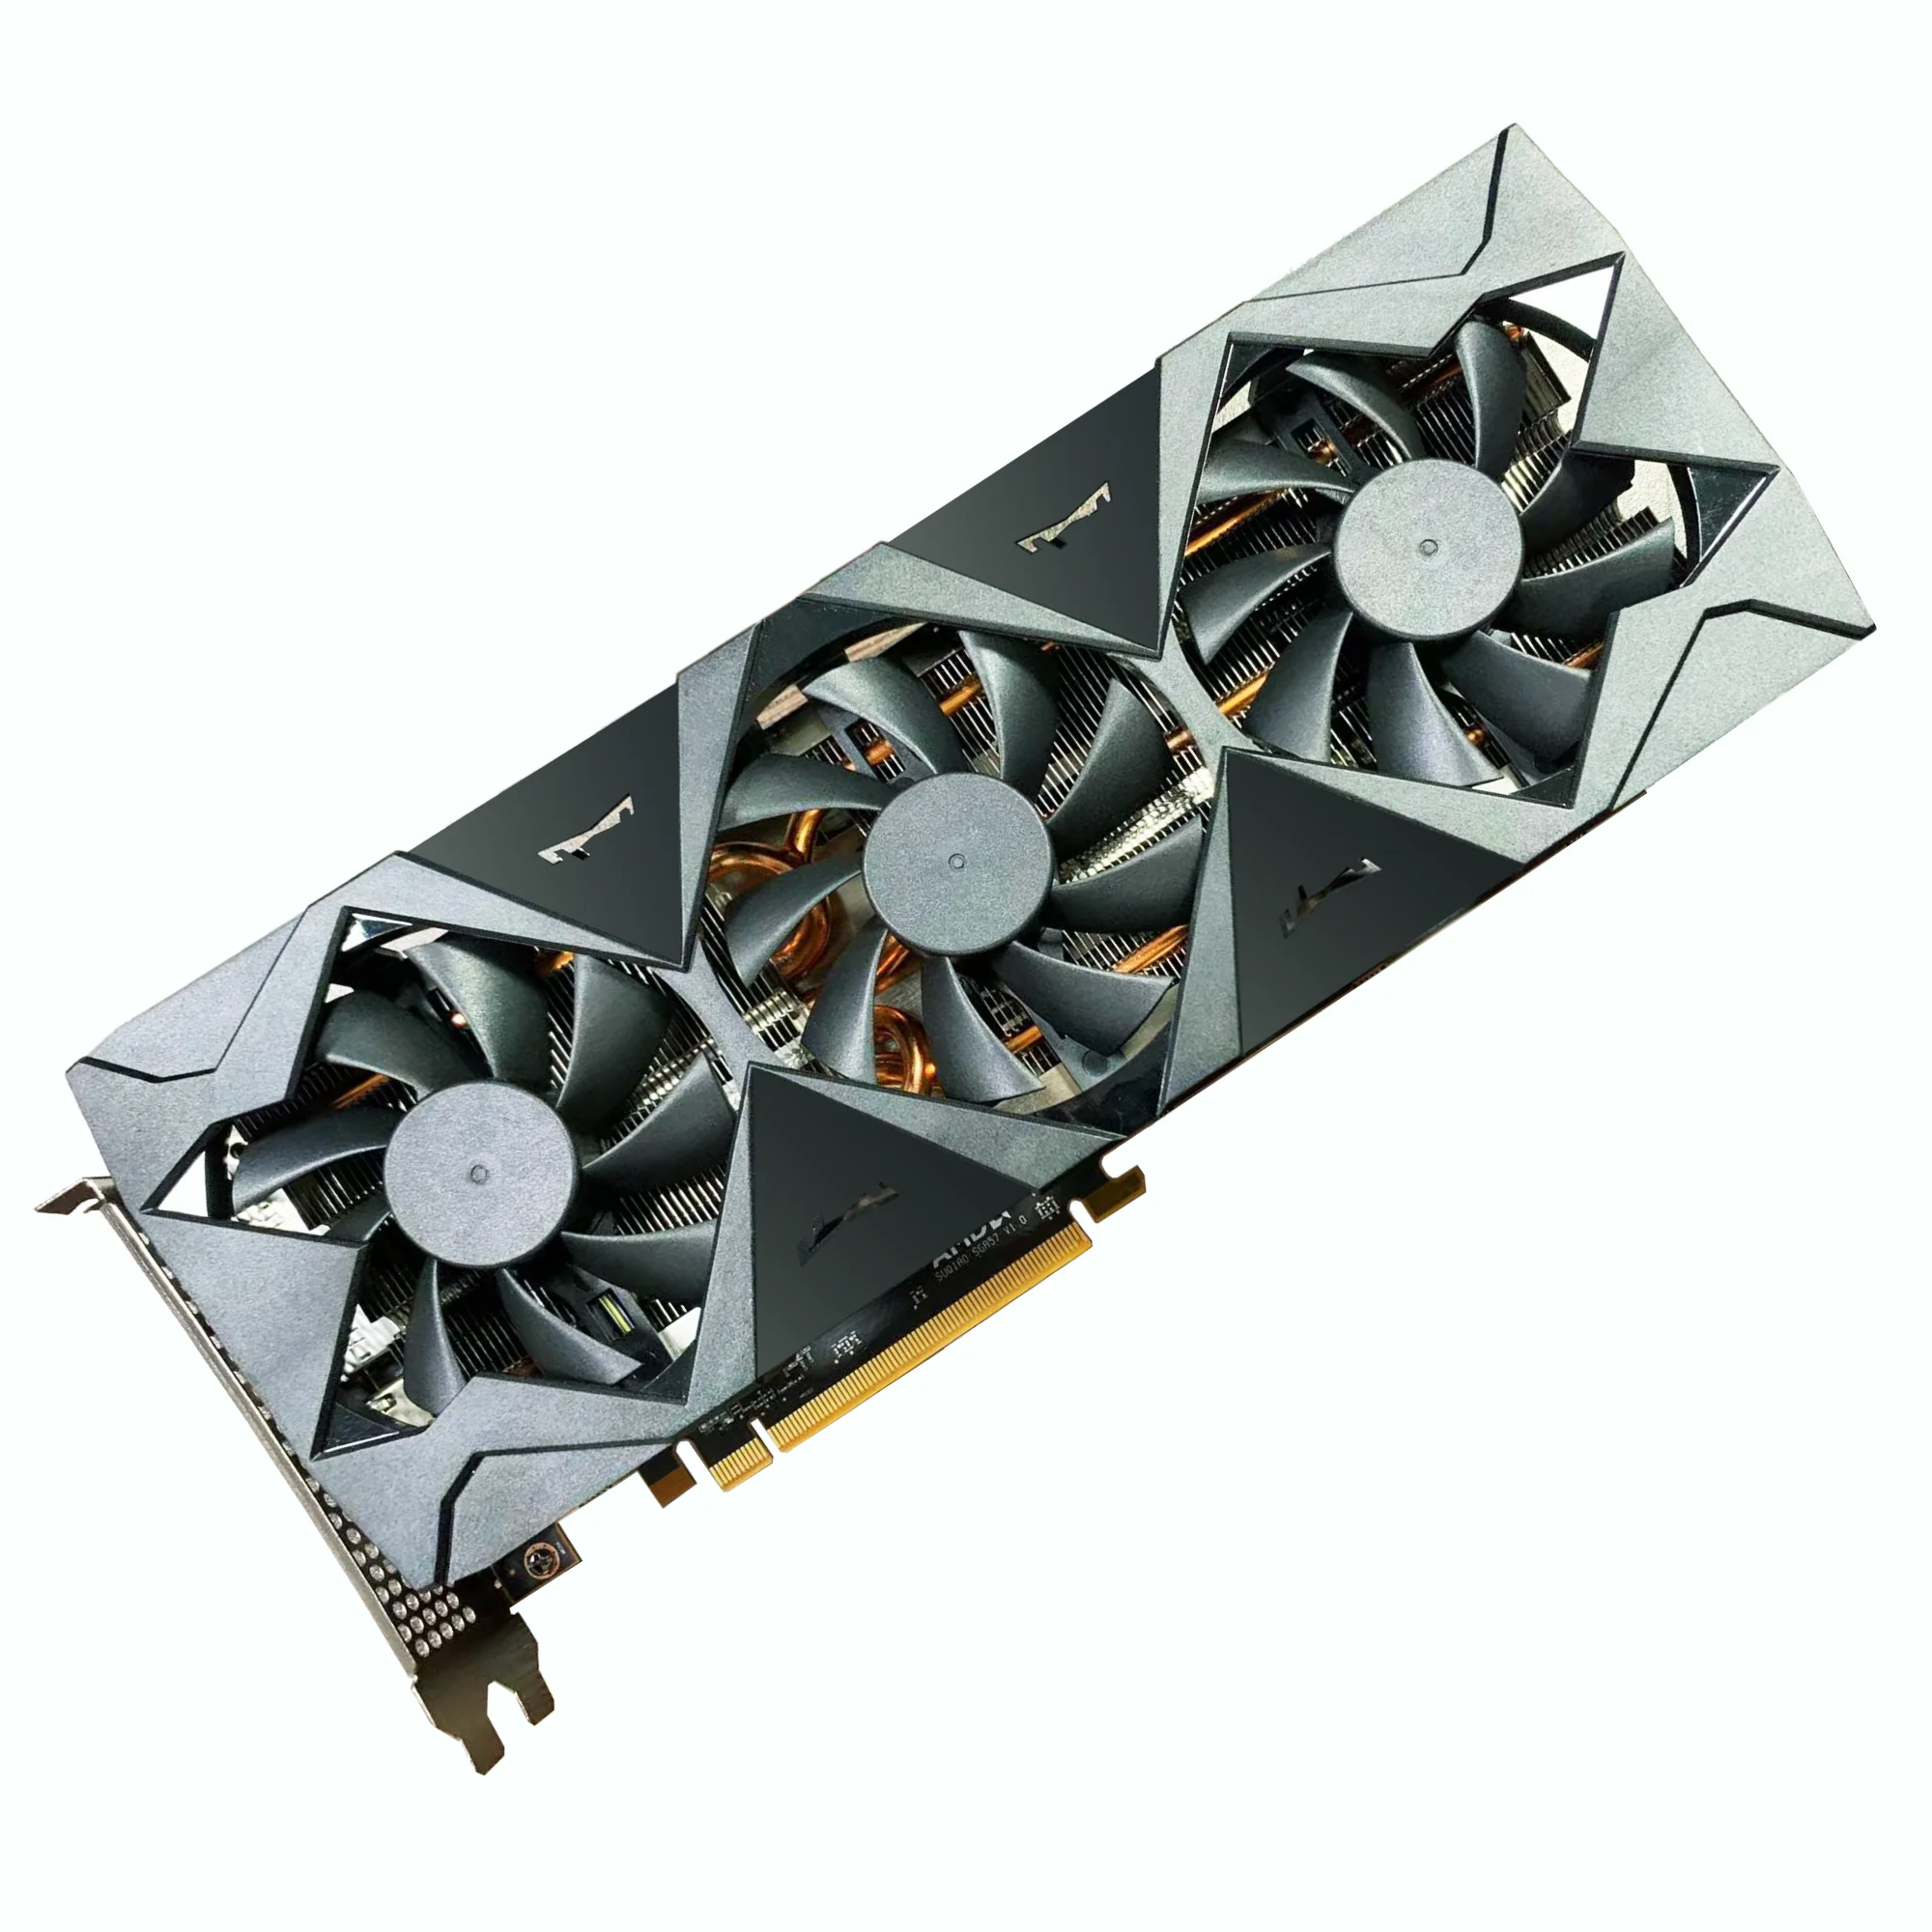 

Brand New Rx Amd 5700xt game Graphics Card Gpu 5700xt For Pc Computer Graphics game Card 6gb 8GB 12gb